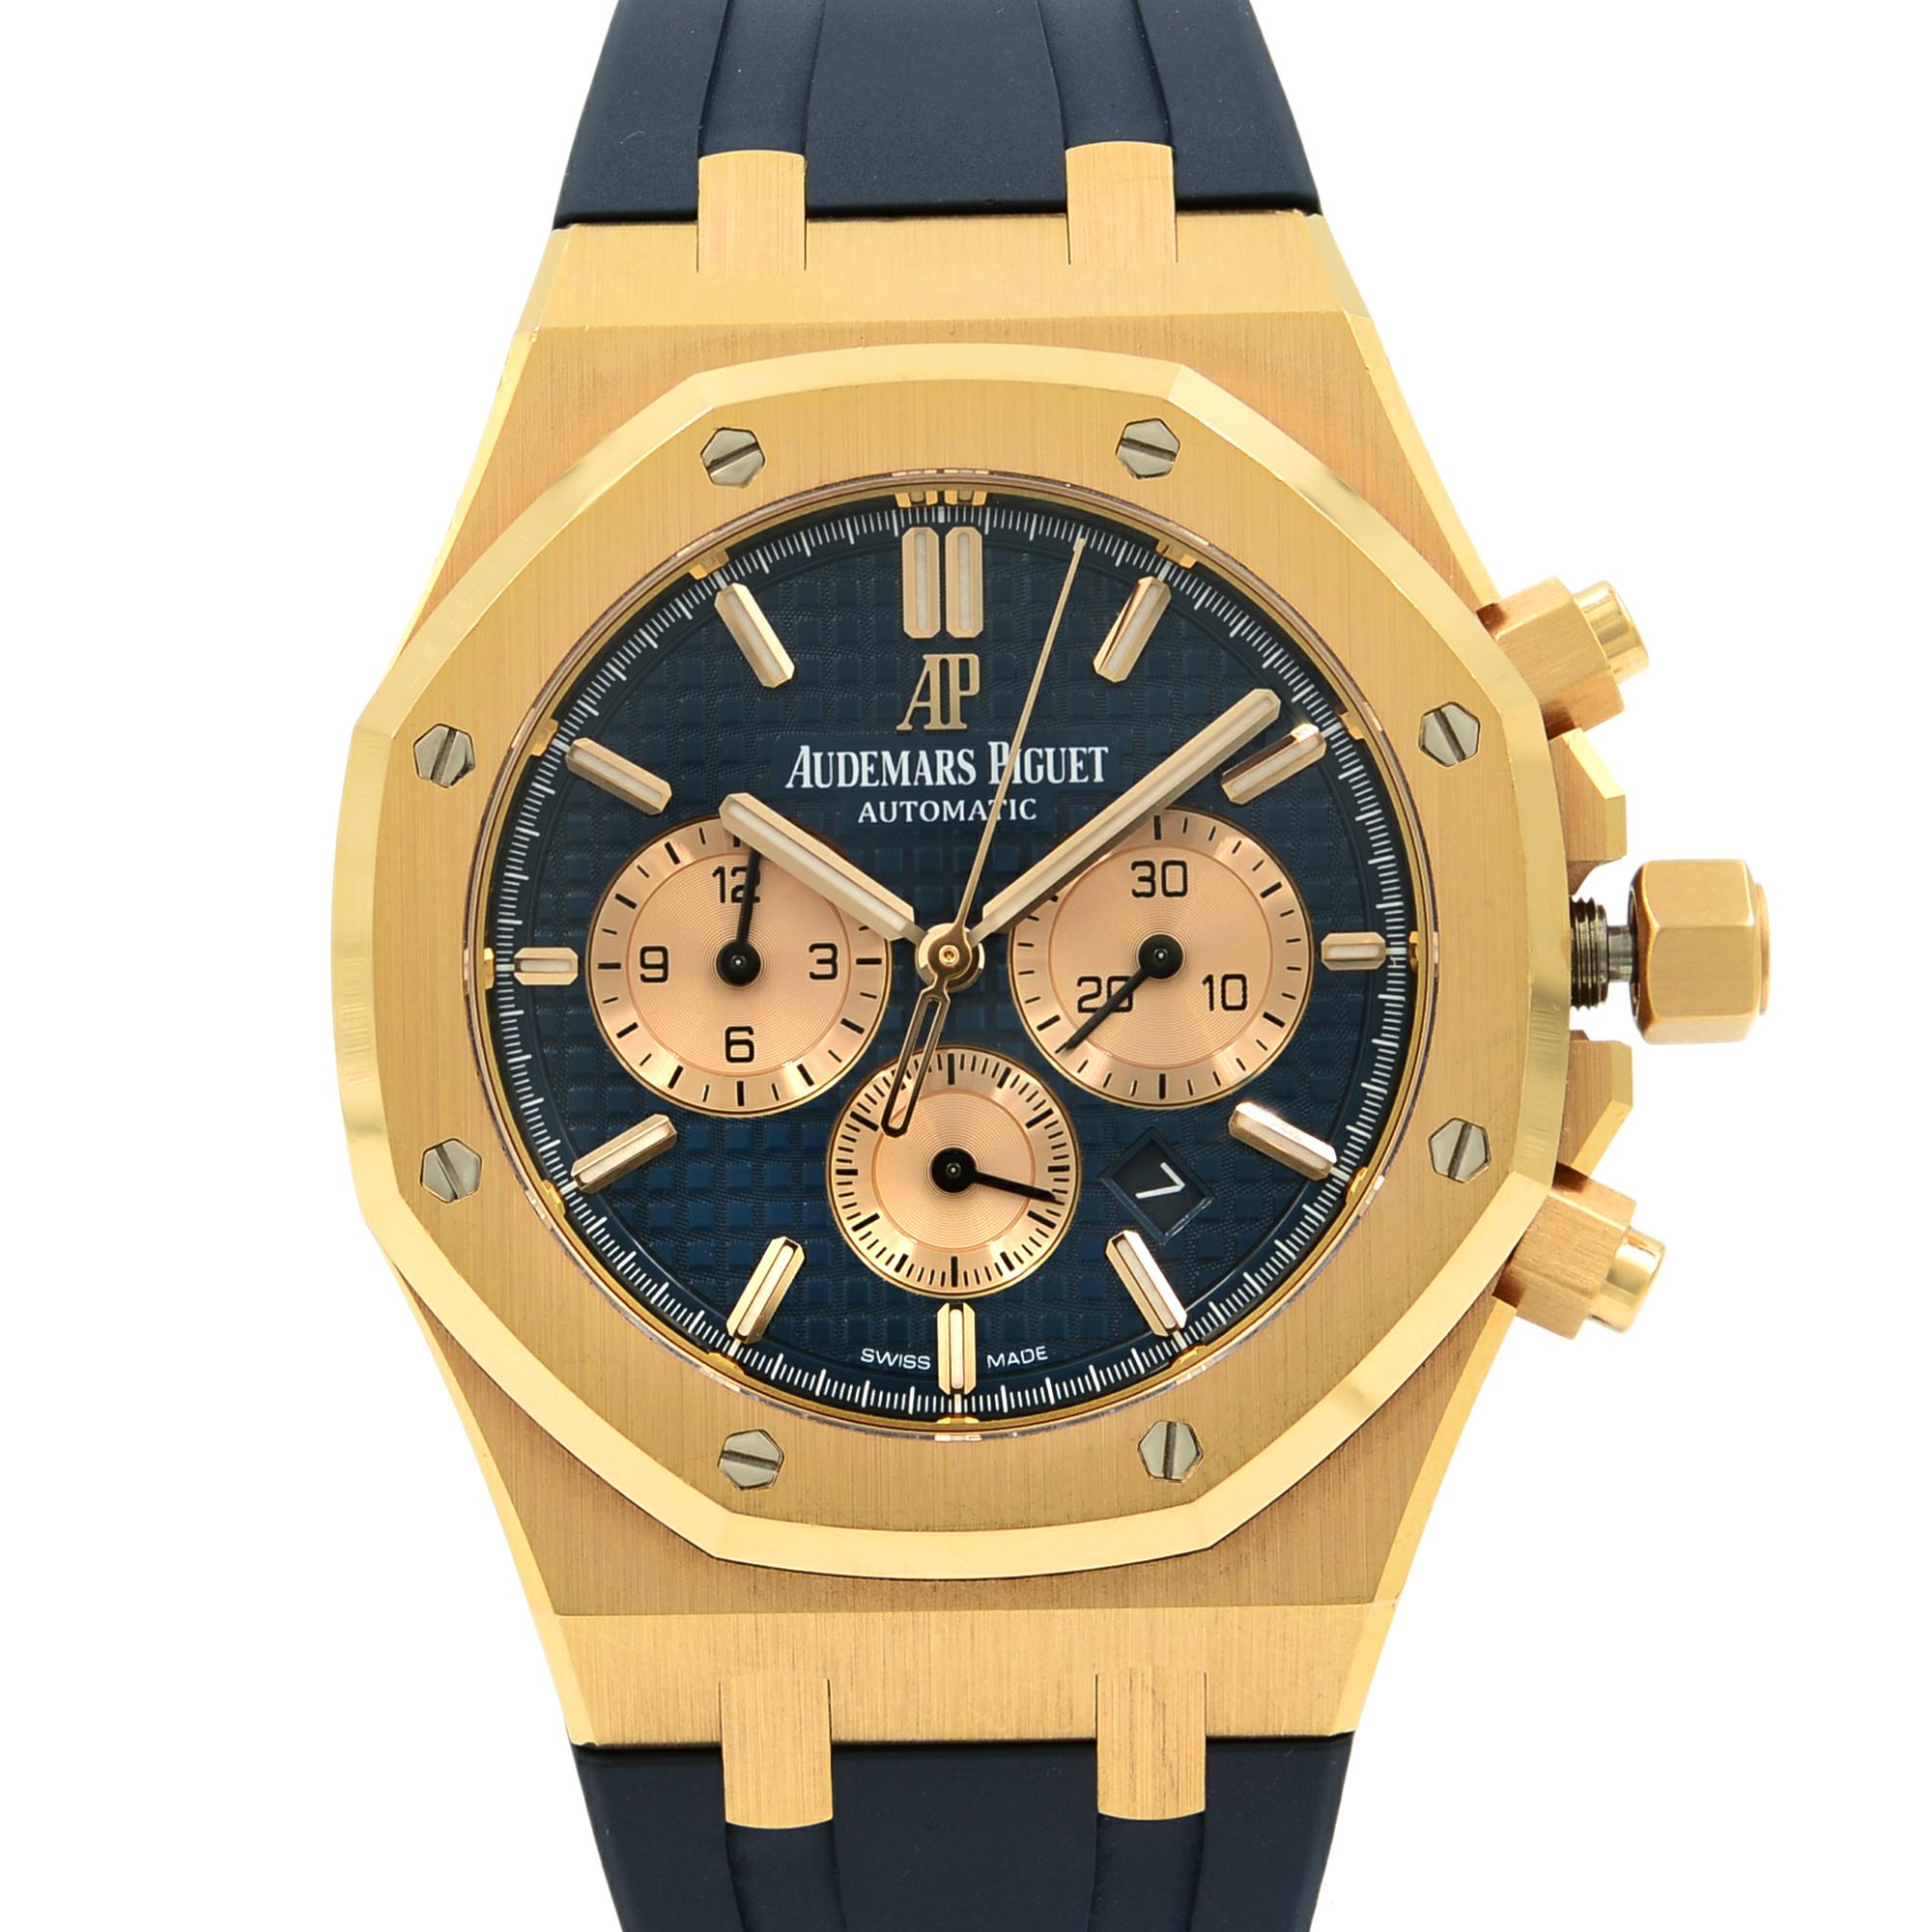 This pre-owned Audemars Piguet Royal Oak 26331OR.OO.D315CR.01 is a beautiful men's timepiece that is powered by an automatic movement which is cased in a rose gold case. It has a octagonal shape face, chronograph, date, small seconds subdial dial